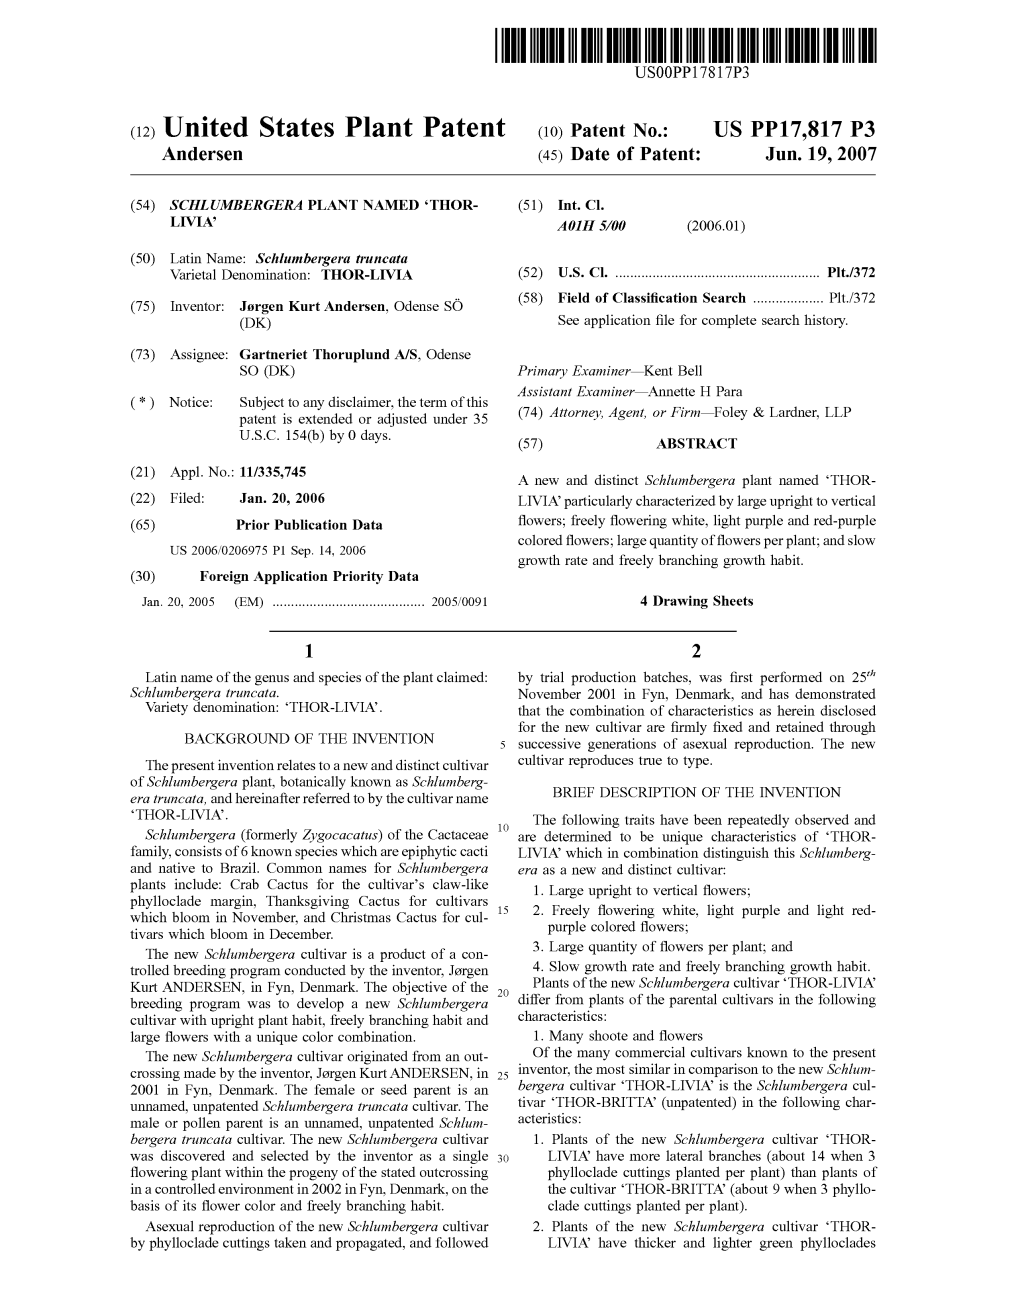 (12) United States Plant Patent (10) Patent No.: US PP17,817 P3 Andersen (45) Date of Patent: Jun